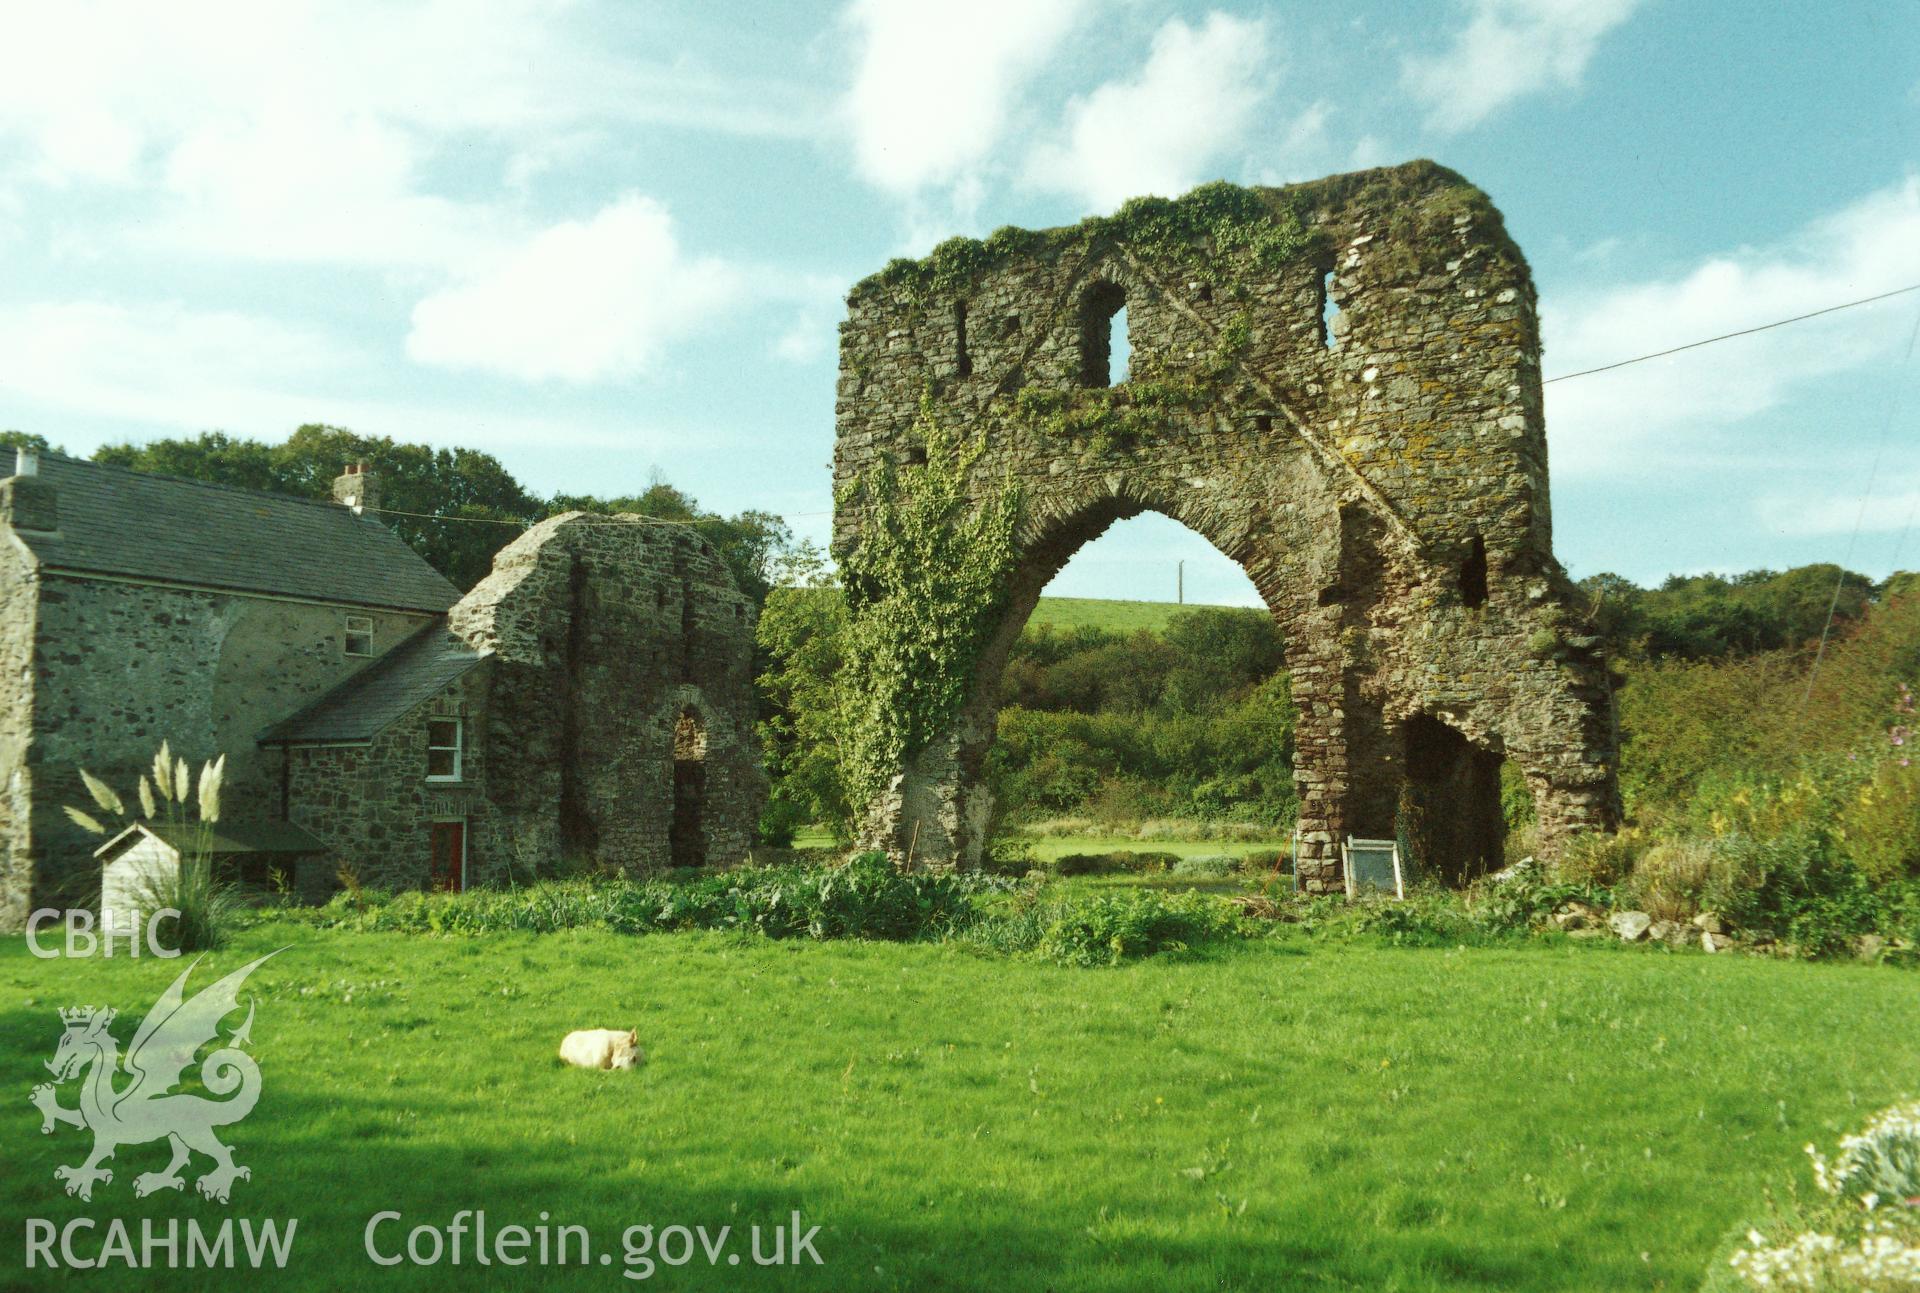 Cadw colour photograph of an exterior view of Pill Priory.